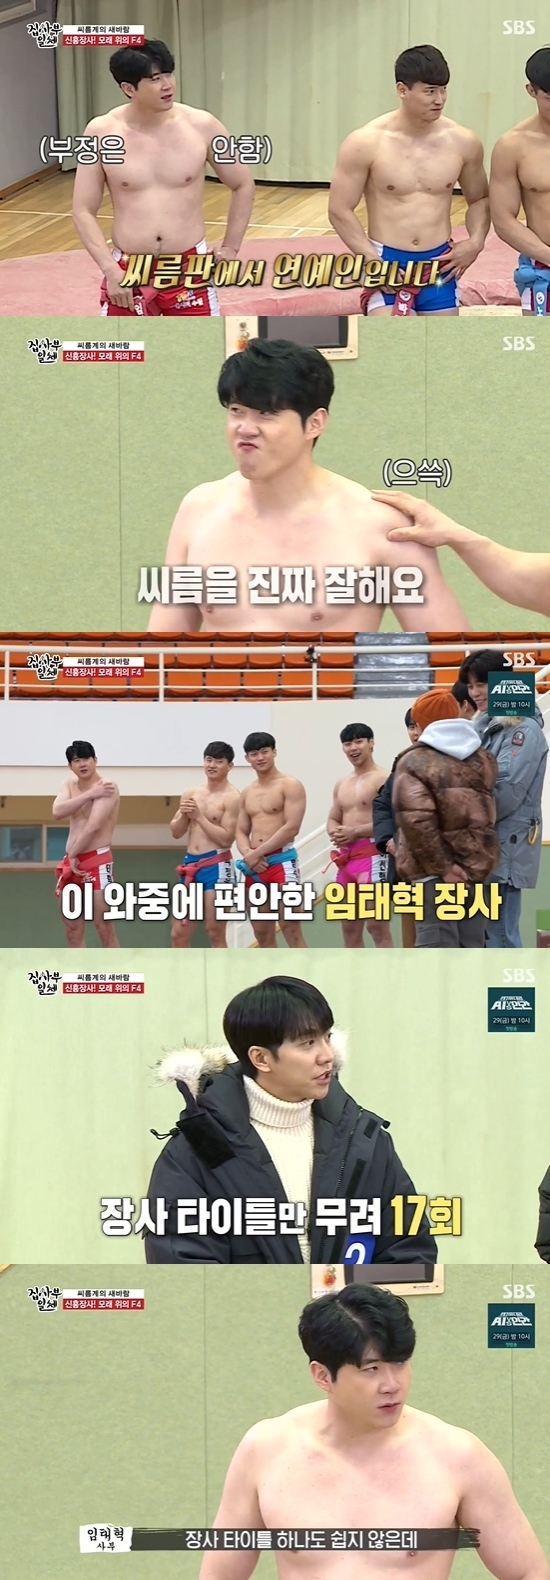 On SBS All The Butlers broadcast on the 24th, Jung Eun-woo, Lee Seung-gi, Yang Se-hyeong, Kim Dong-Hyun and Shin Sung-rok played Wrestle Battle.Starting with the youngest Taebaek-Fezensac in the 2000s, heo Seon-haeng, Taebaek-Fezensac Nobumsu, Wrestle David Park Jung-woo, Wrestle of Lightweight, and im tae-hyuk appeared in All The Butlers.Shin Sung-rok described Wrestle players as sculptures, and Lee Seung-gi said Park Jung-woos nickname was David of Wrestle.Park Jung-woo said, When I was doing a Wrestle program, my fans built it, but it is embarrassing.However, Noh Bum-soo, heo Seon-haeng said, Do not you like it? And im tae-hyuk also laughed, saying, I like to take off my clothes.Thanks to these Vic-Fezensac people, Wrestles boom is going up again, Lee Seung-gi said.I had no fans before, and only the elders watched, said im tae-hyuk. Nowadays, there is no place to play Wrestle.When Lee Seung-gi asked, Im tae-hyuk players fans? im tae-hyuk replied, The total number of fans has increased.When heo Seon-haeng said it was because of im tae-hyuk, Lee Seung-gi asked, Are you scared senior?Heo Seon-haeng said of im tae-hyuk, I am an entertainer in the Wrestle edition.I am really good at Wrestle, he said, saying that he grew up dreaming when he was a child watching the Wrestle video of im tae-hyuk.Heo Seon-haeng said, I happened to see Wrestle on the way, and I thought I should do it.I heard a genius, Lee said. Lee Seung-gi said, Did not you win the gold medal and Taebaek weight class?Is not it more genius? Heo Seon-haeng laughed, saying, What is the fortune?While the two tit-for-tat, Yang Se-hyeong revealed that the Vic-Fezensac title of im tae-hiuk was 17 times.Im tae-hyuk pointed to heo Seon-haeng, No Beom-su, and laughed, saying, One, four of these are.Lee Seung-gi said, I heard it vaguely when Hodong was broadcasting, but it was a great Pride to pass 10 Vic-Fezensac titles.Im tae-hyuk said, I think it is great to go over ten Vic-Fezensac titles, but I did it 17 times.Lee Seung-gi asked, Who is above number 17? Im tae-hyuk said, I am the most active.Since then, heo Seon-haeng has taught James Kyson how to suppress.How do other players overpower James Kyson? asked Cha Jung Eun-woo, but im tae-hyuk said, I do not fight the battle.I put my name on the table, he said.Meanwhile, Kim Dong-Hyun beat Lee Seung-gis field bridge to become the Vic-Fezensac in the All The Butlers ship Vic-Fezensac Wrestle competition./ Photo = SBS broadcast screen